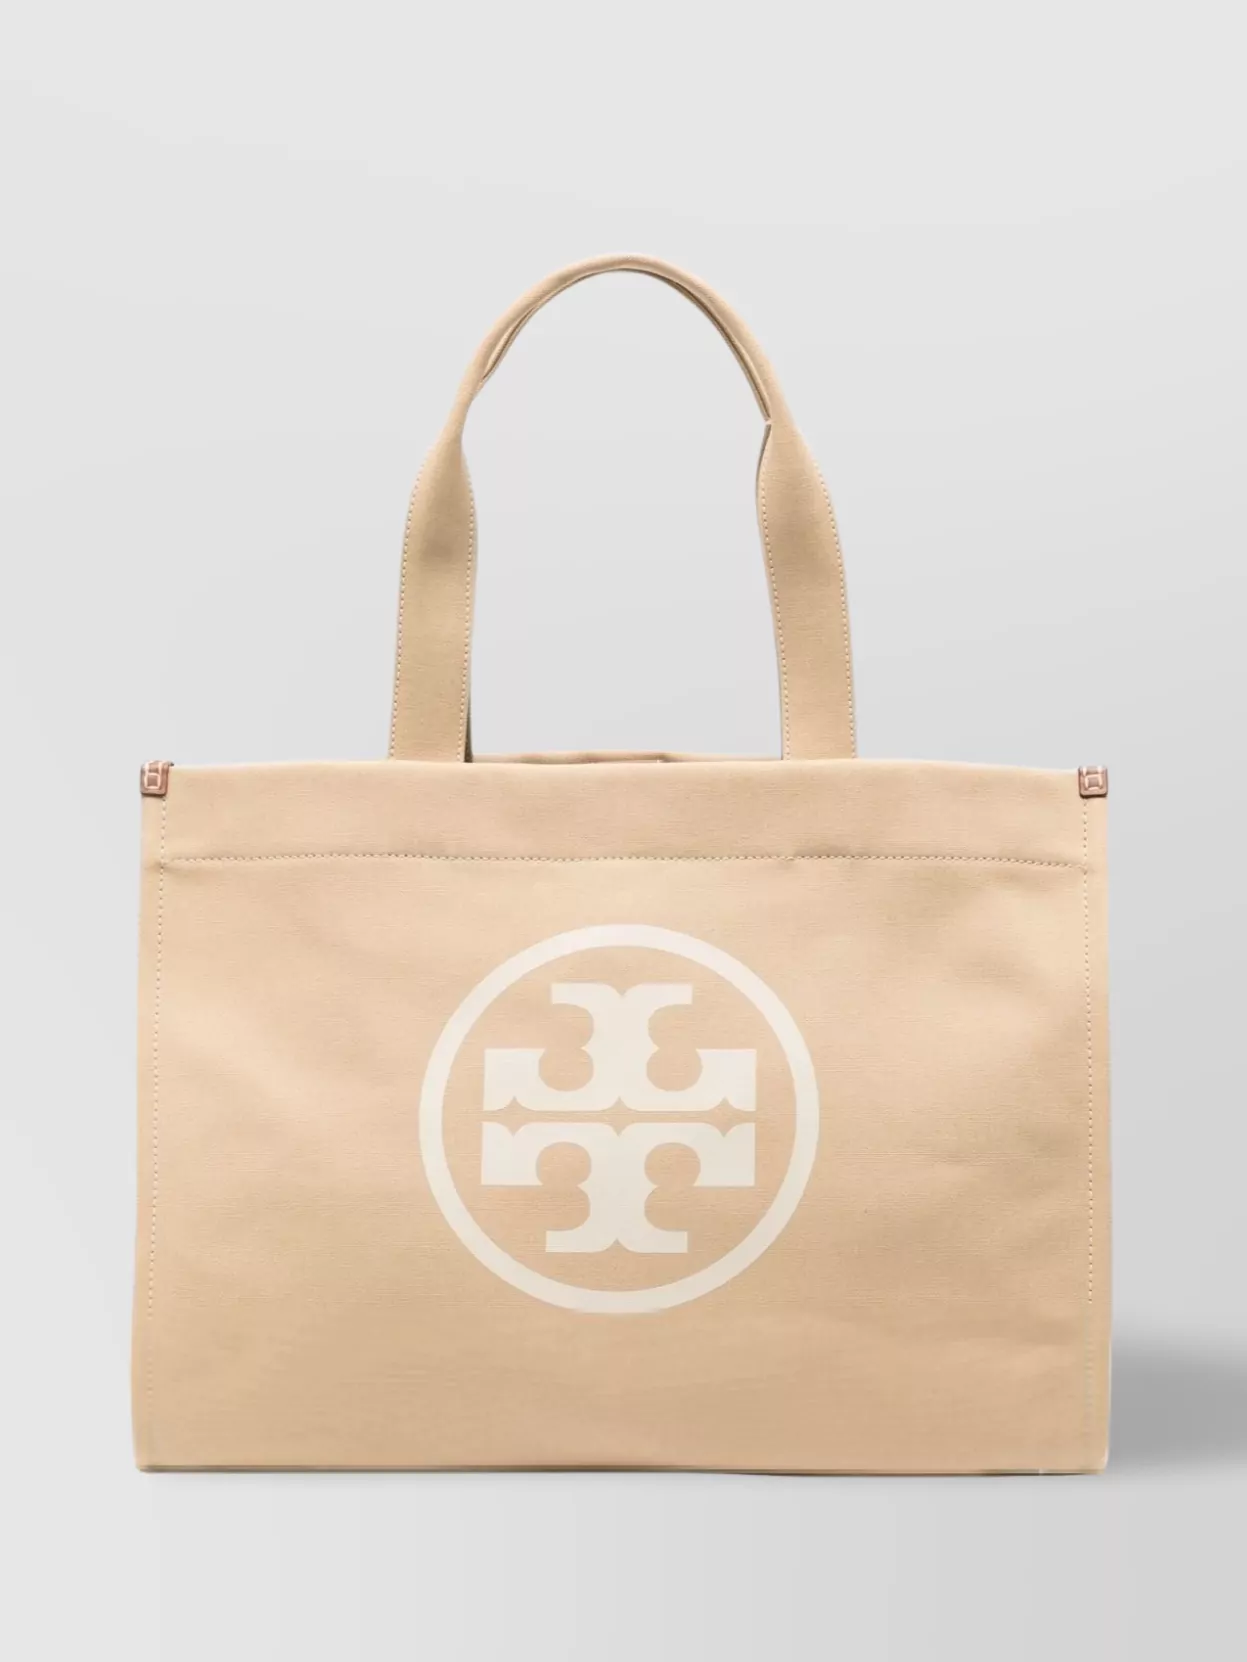 Shop Tory Burch Canvas Tote Bag With Rectangular Shape And Round Handles